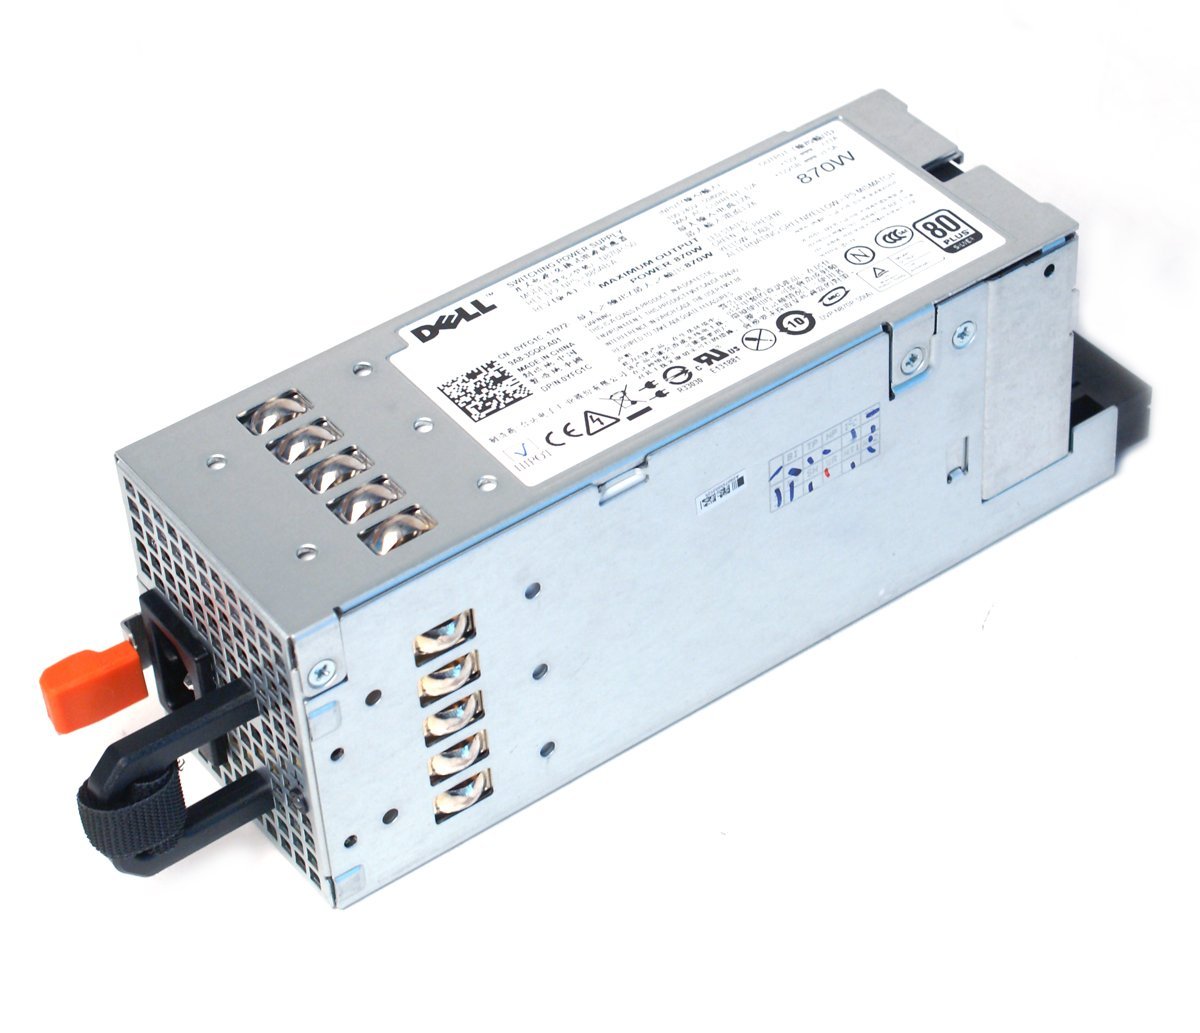 YFG1C Dell 870W Power Supply for PowerEdge R710 and T610